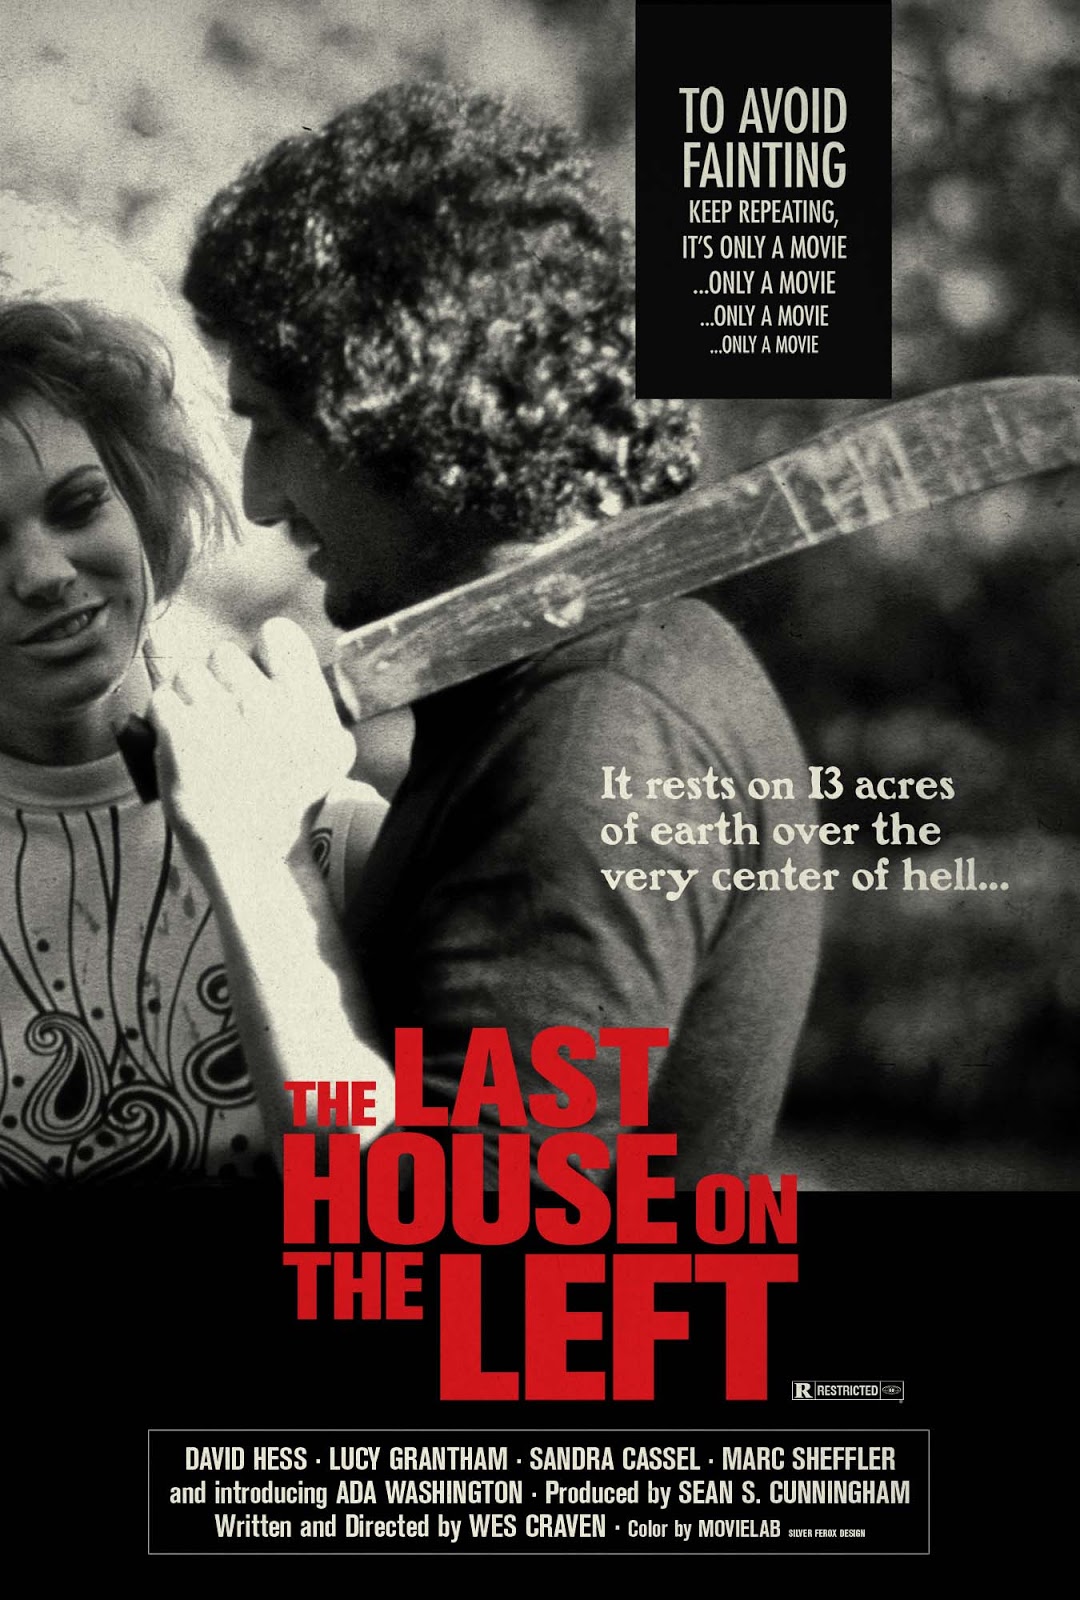 The Last House on The Left (1972)